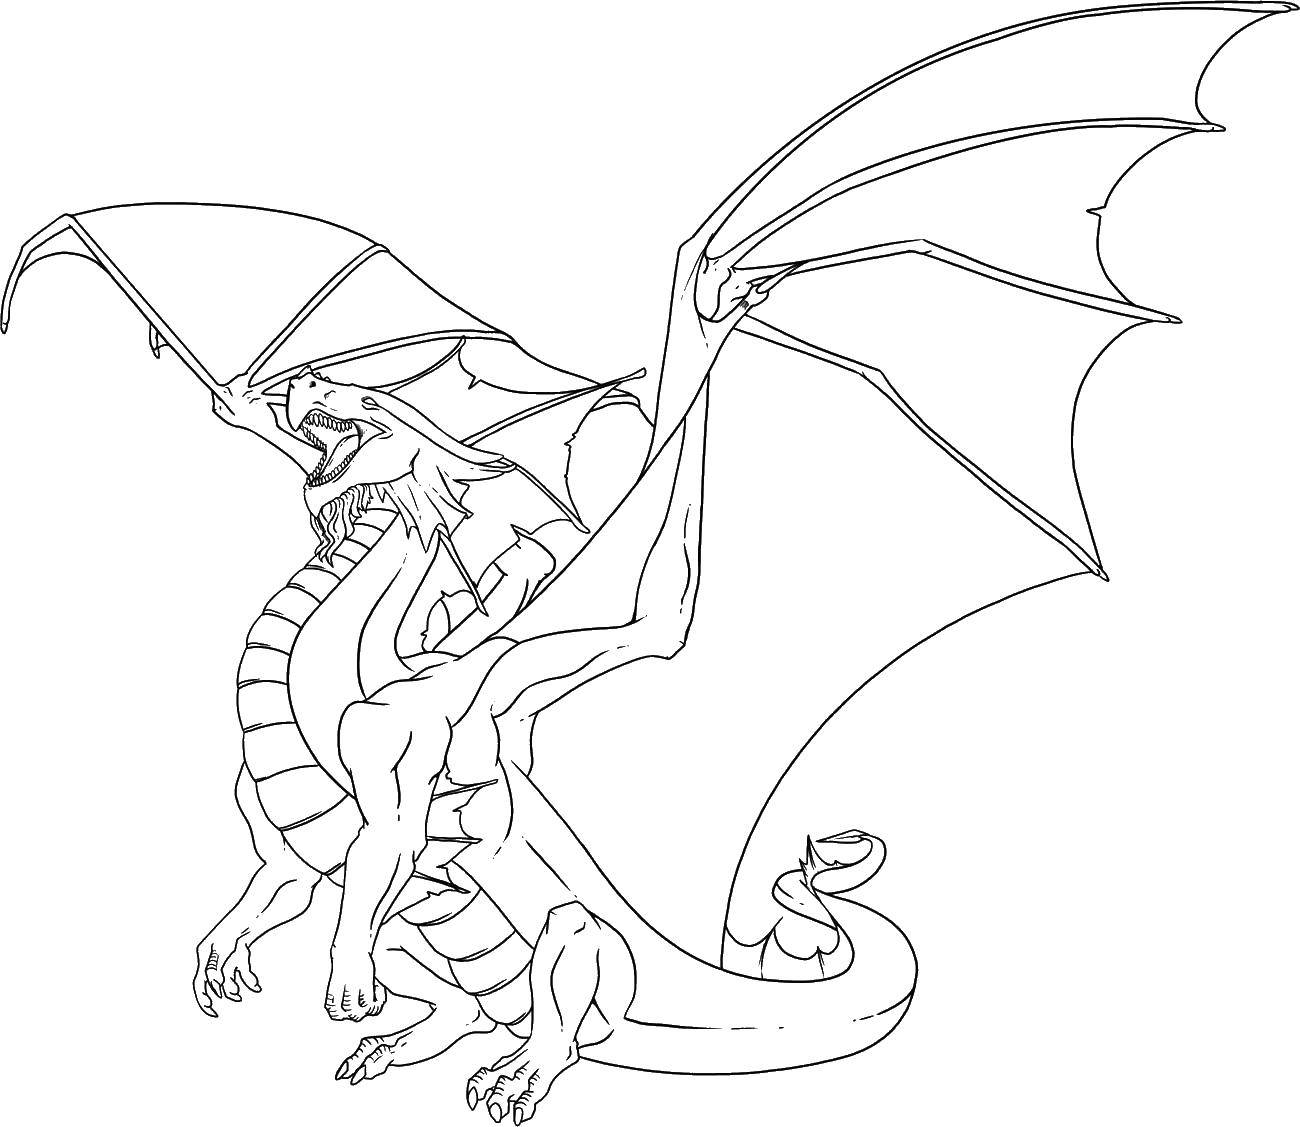 Coloring Dragon with wings. Category Dragons. Tags:  the dragon.